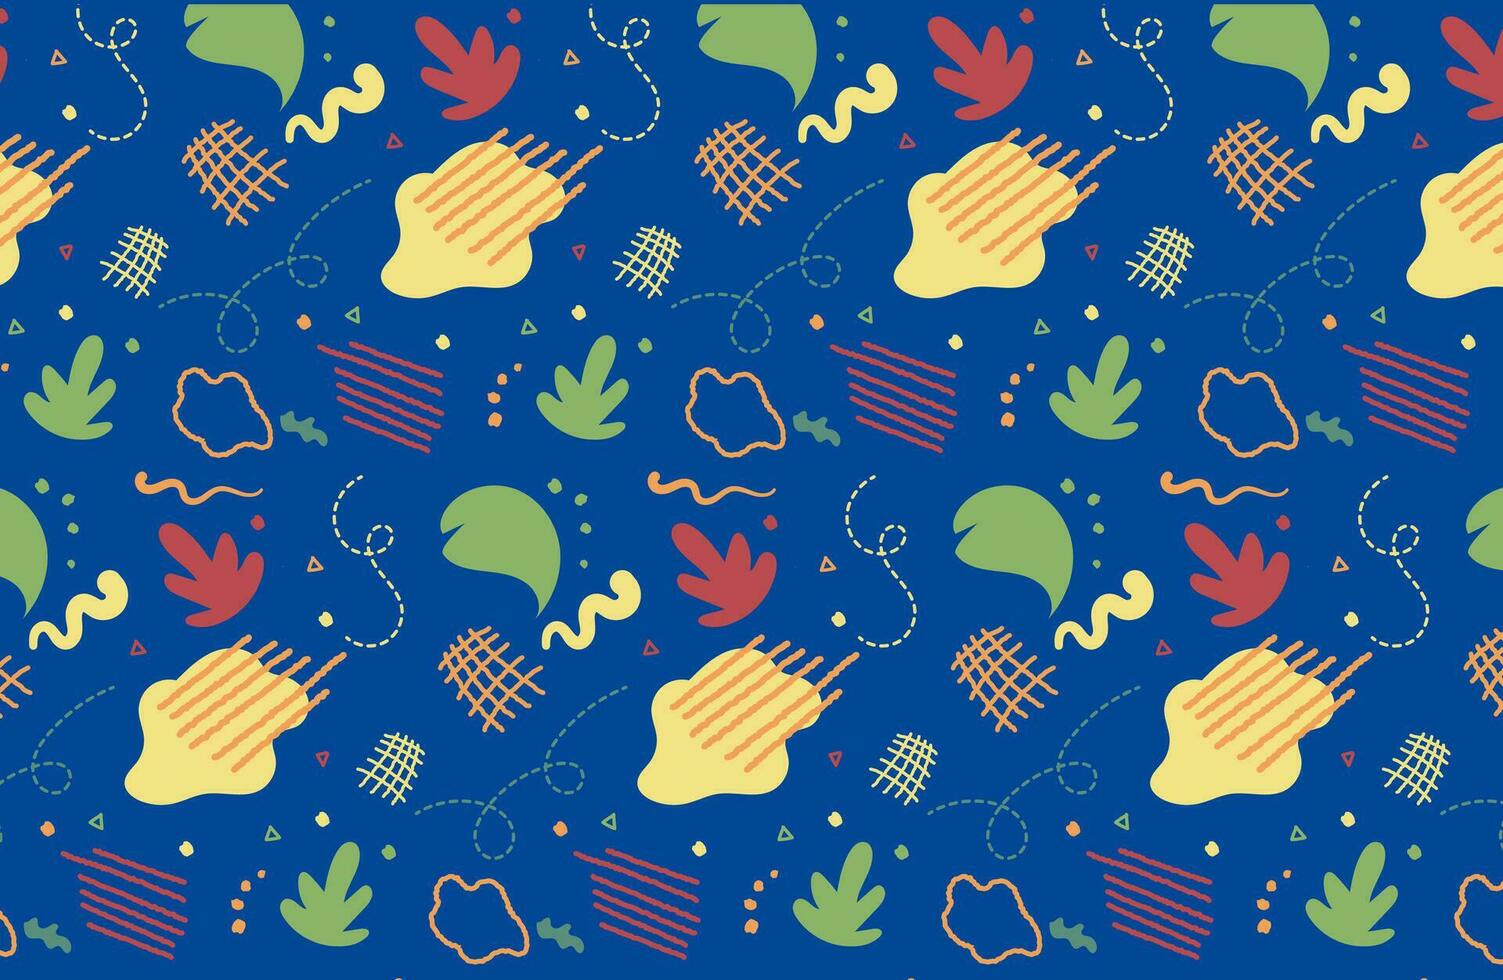 Abstract Hand drawn Element Pattern vector